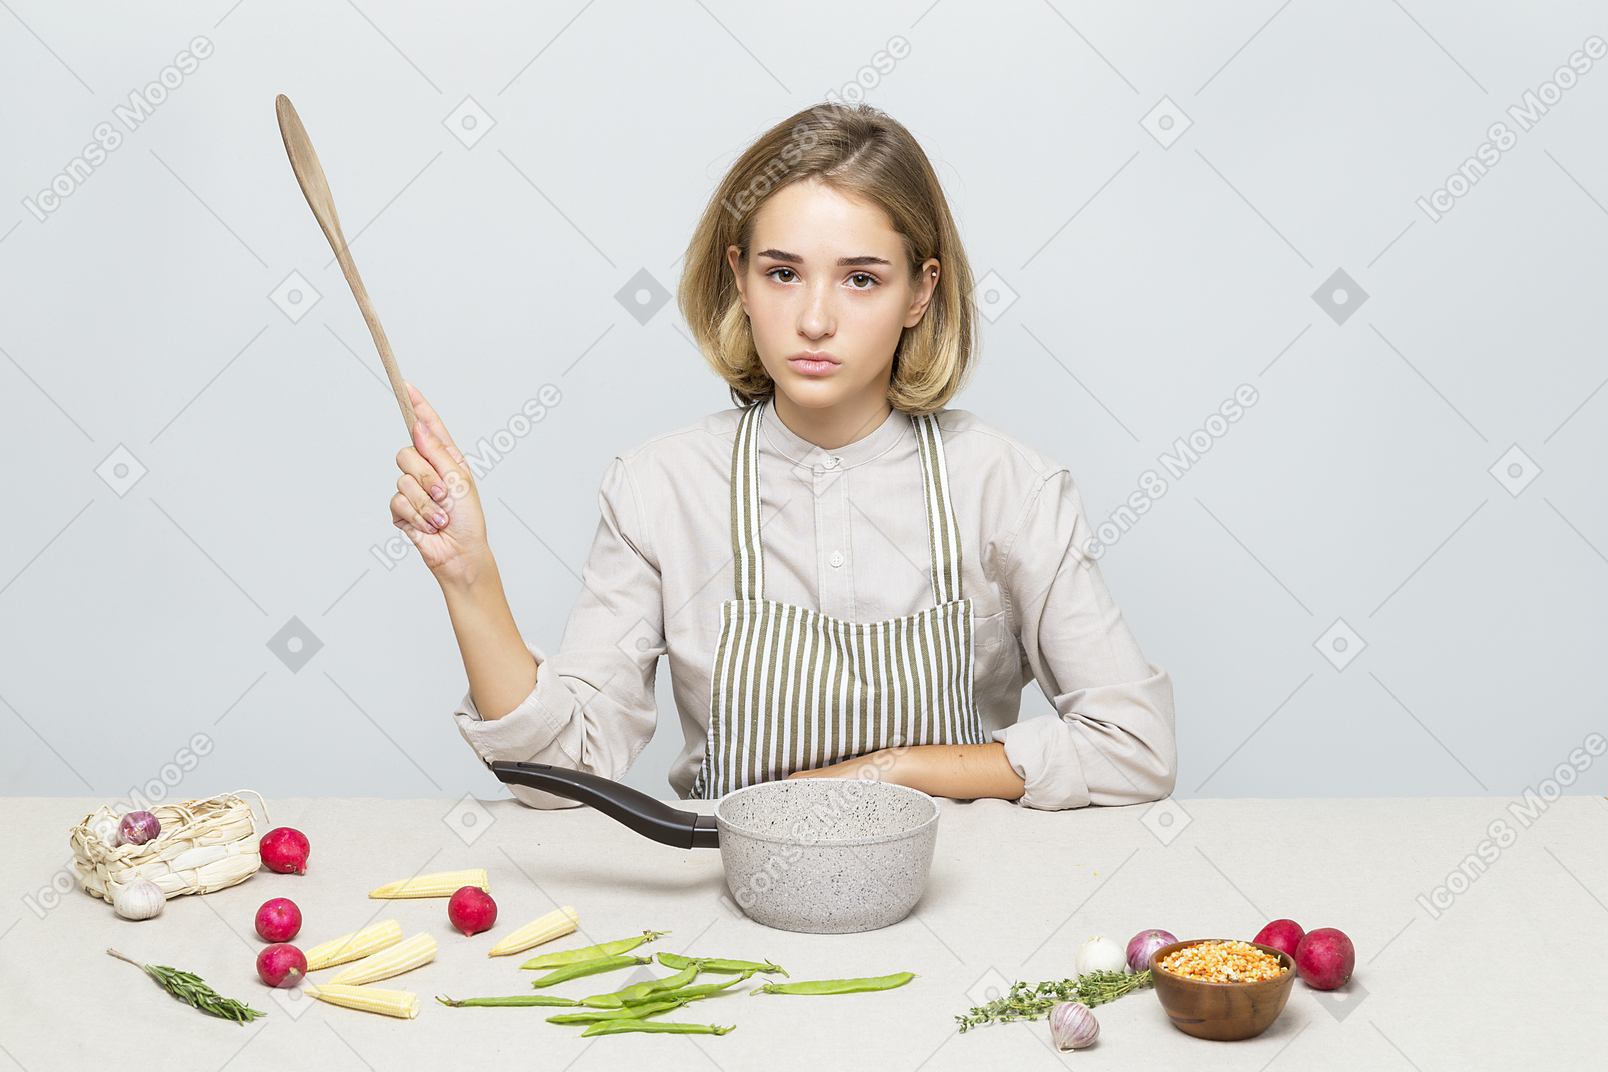 Girl in apron holding a wooden spoon and sitting at the table with pan and vegetables on it